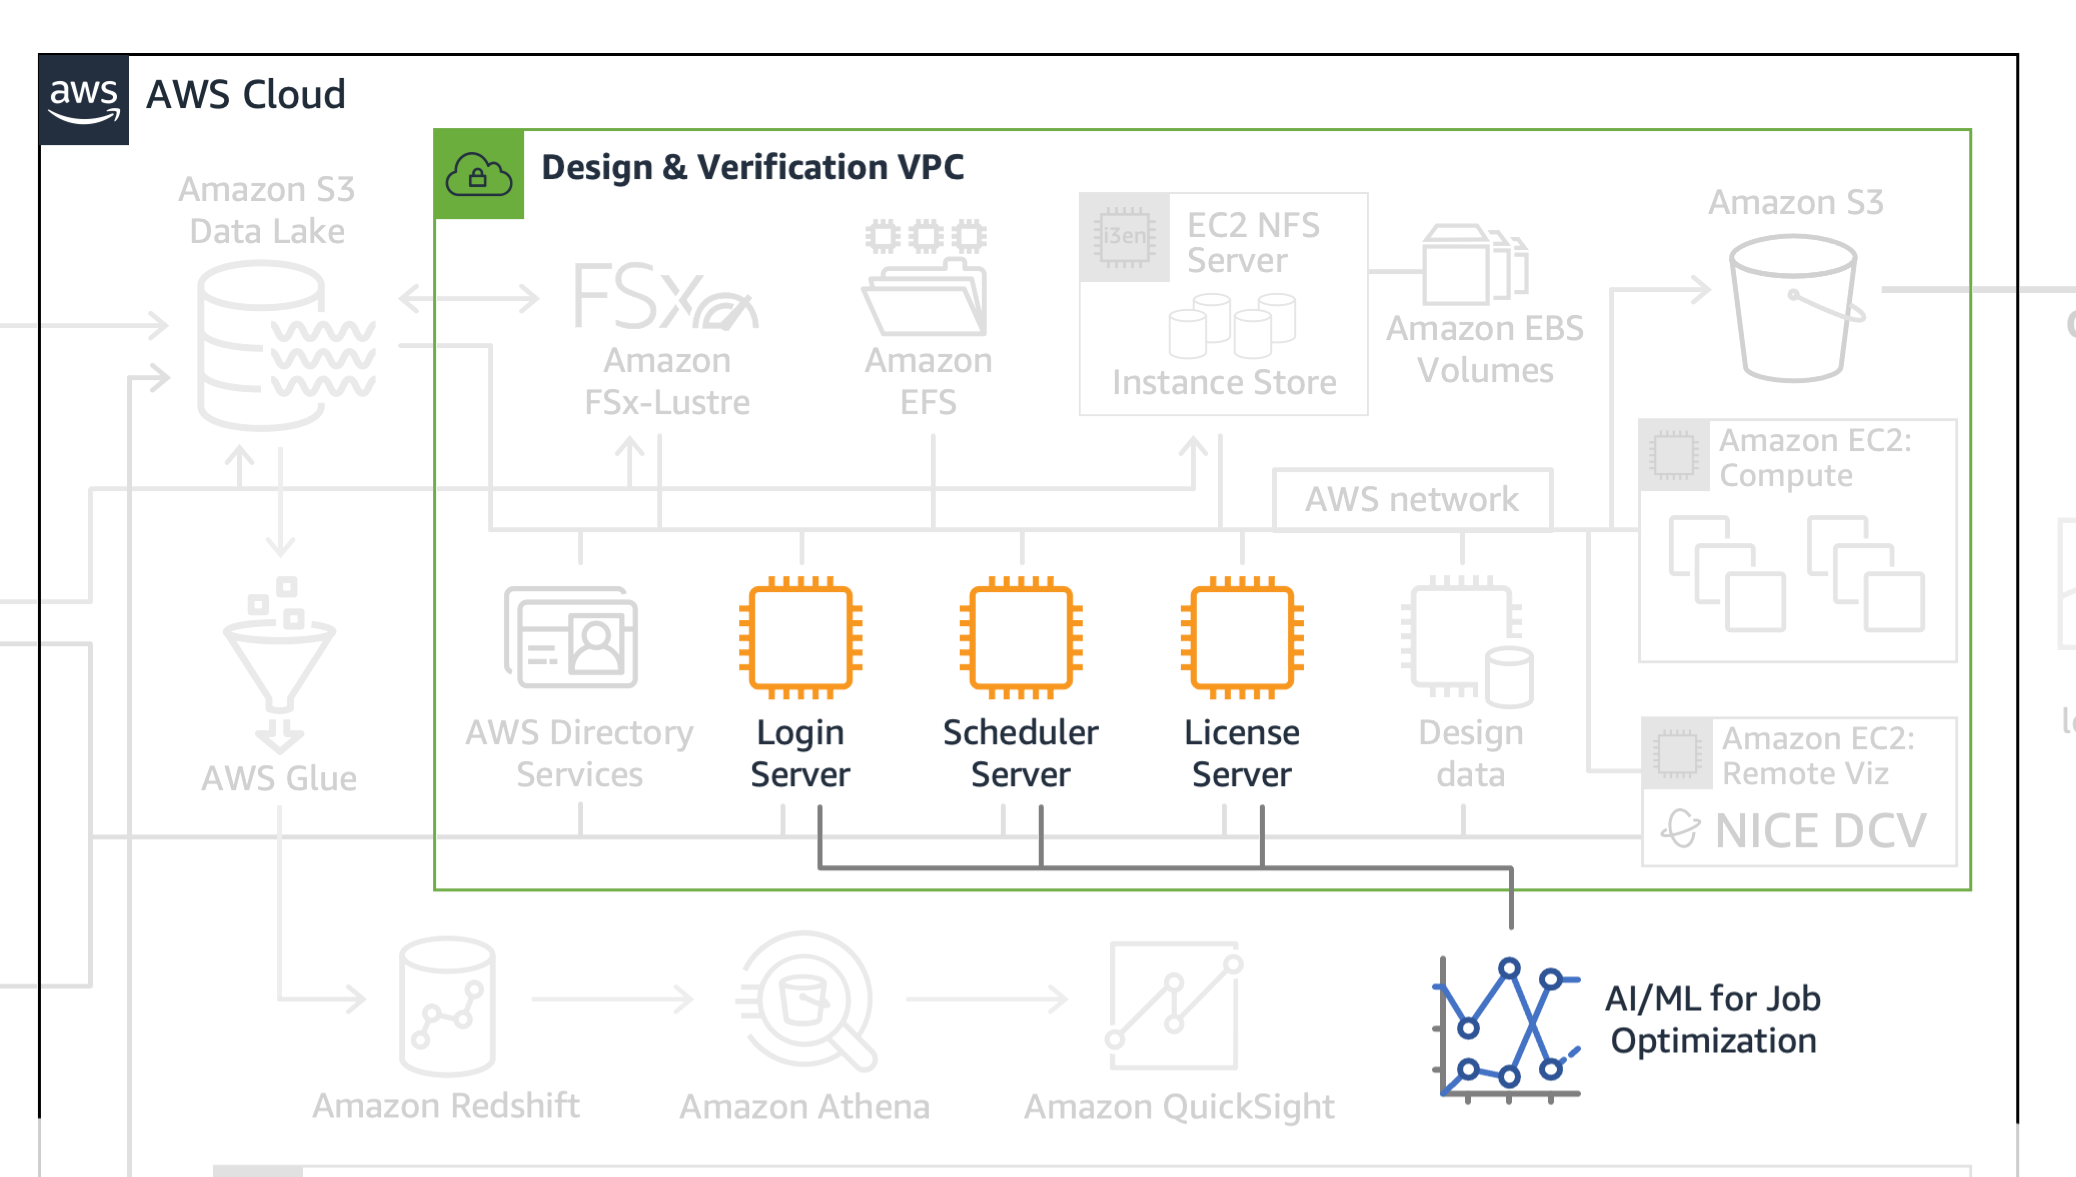 
        This image shows the AI/ML workflow for job optimization.
      